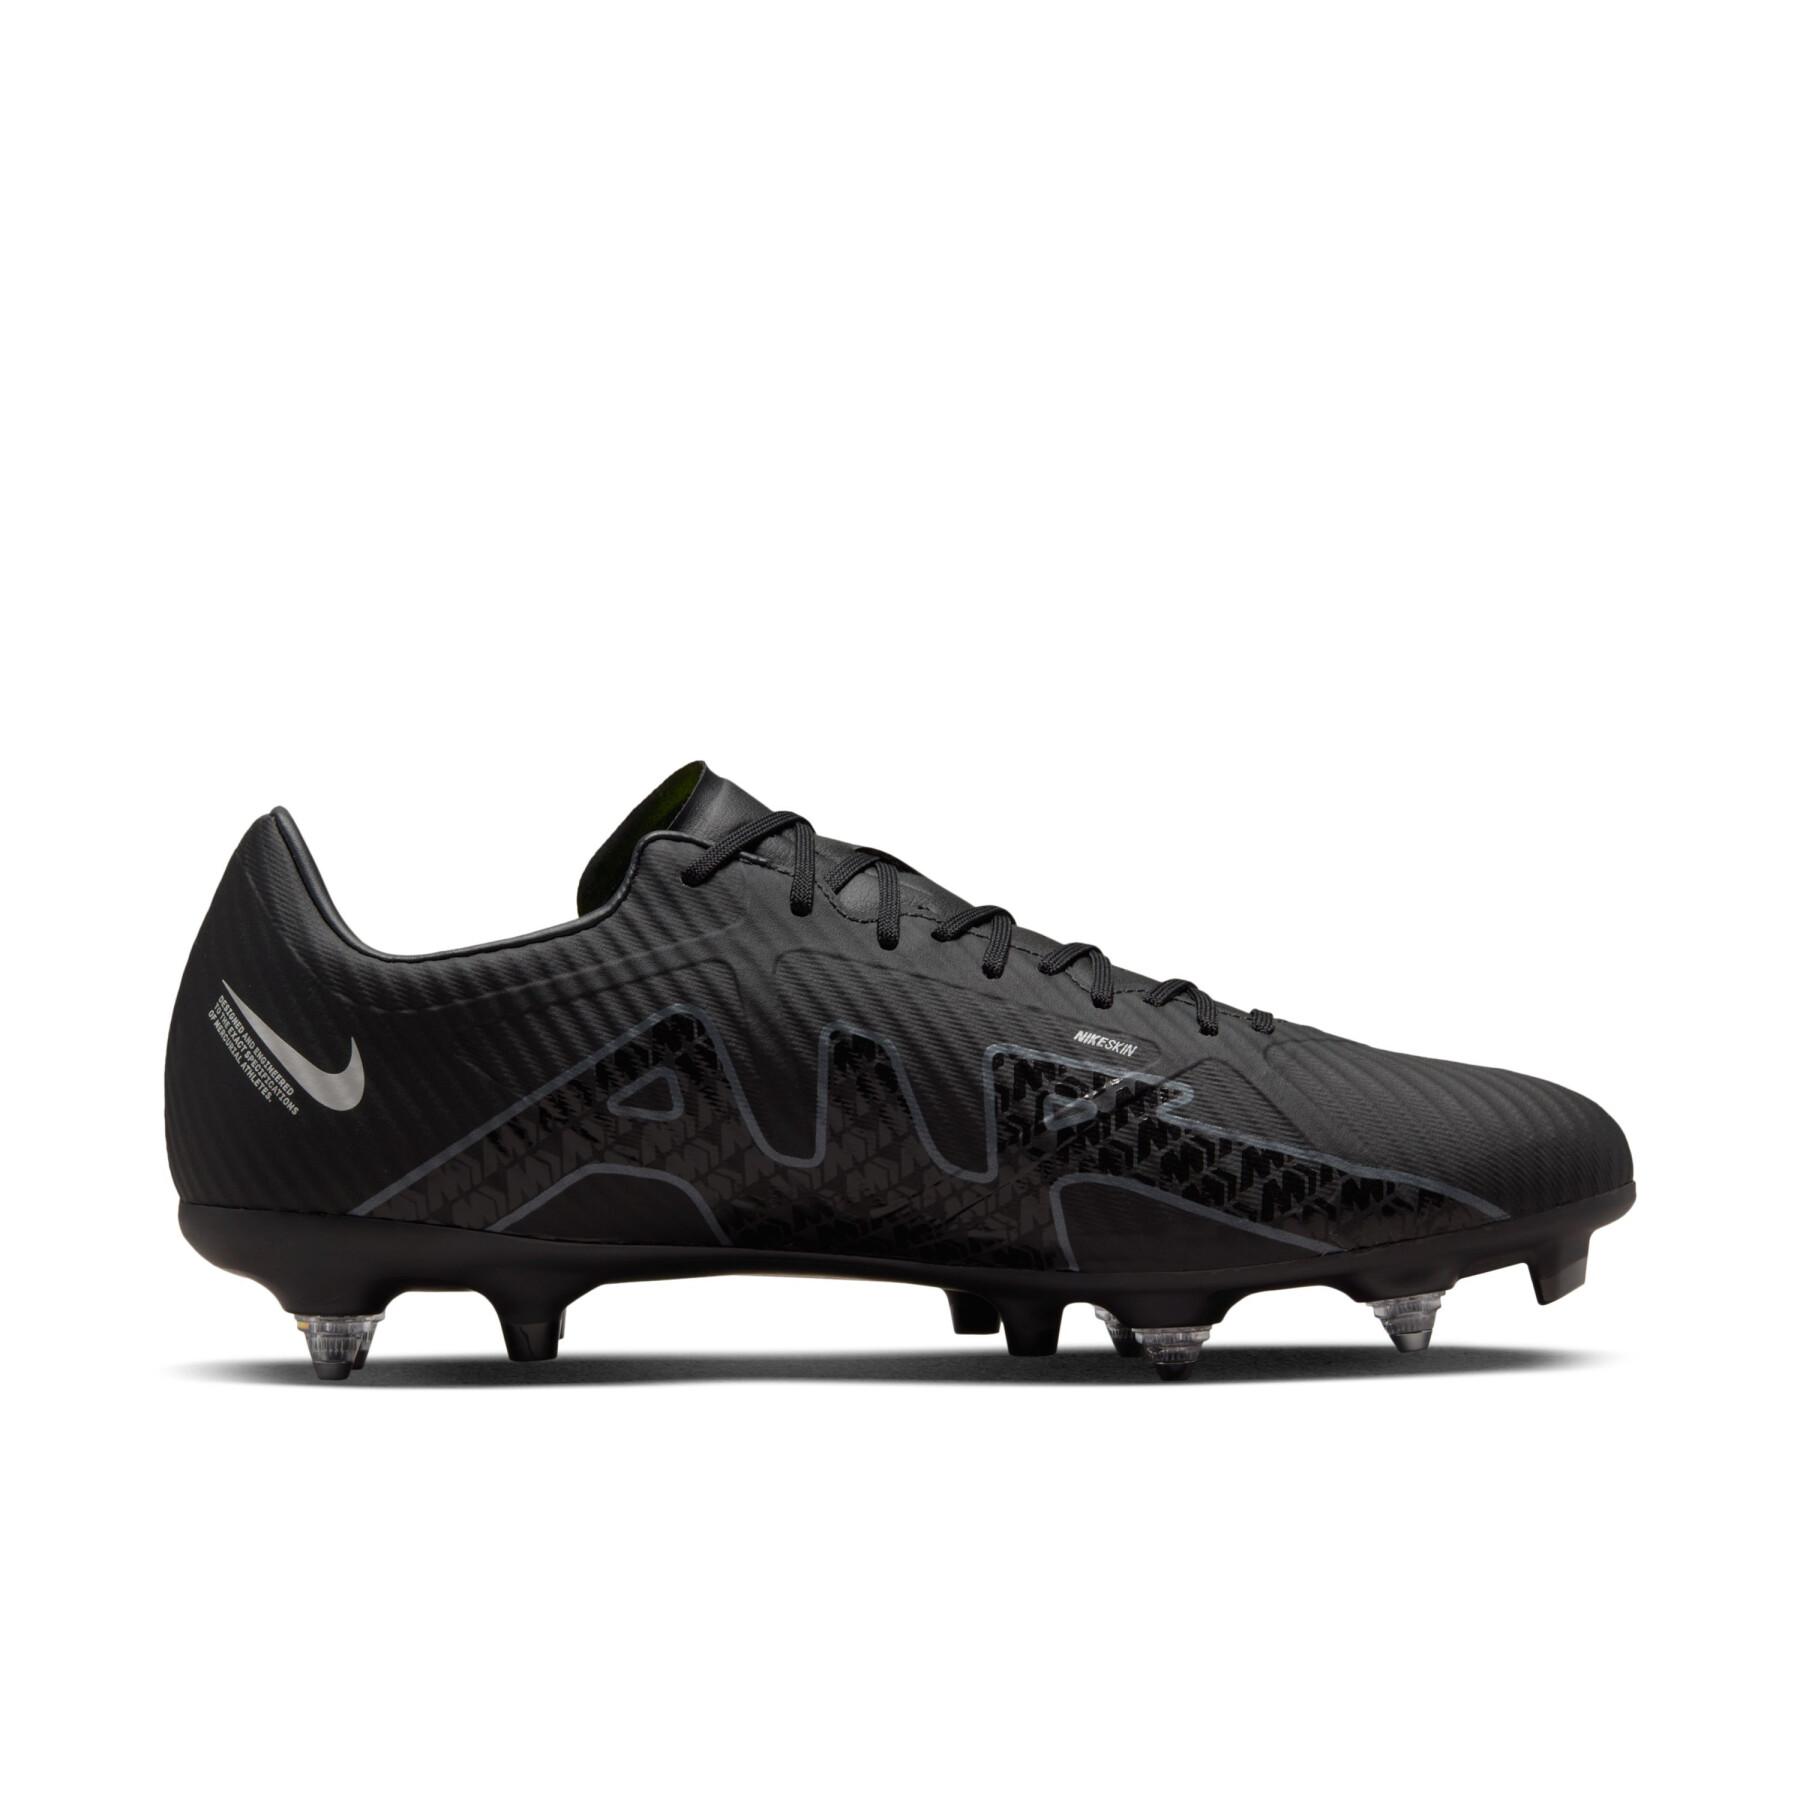 Soccer shoes Nike Zoom Mercurial Vapor 15 Academy SG-Pro - Shadow Black Pack